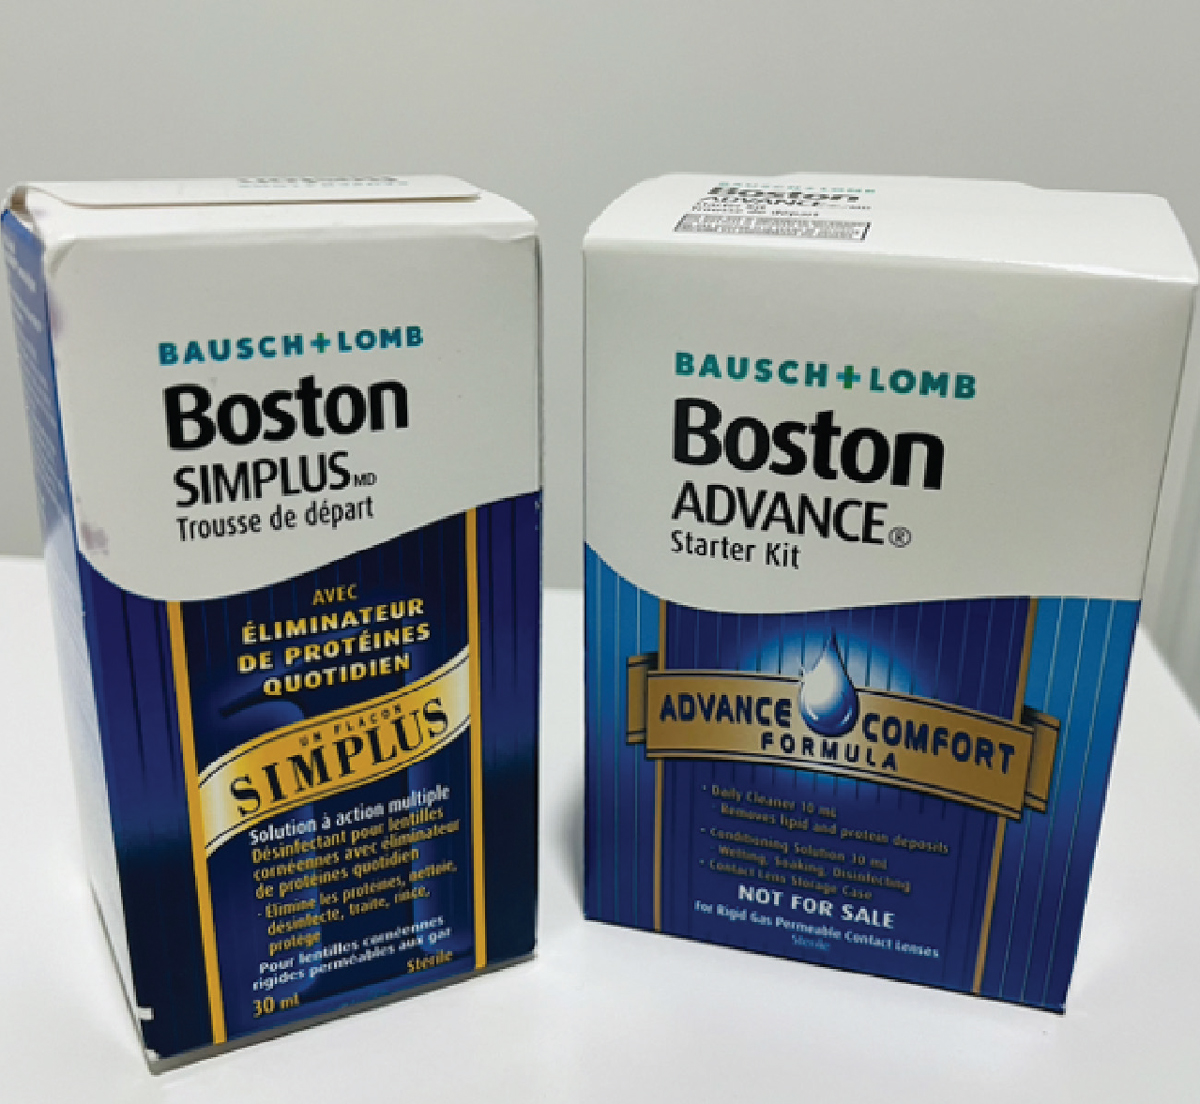 For GP lenses, Boston Simplus is a one-step multipurpose system, whereas Boston Advance is a multistep cleaning system.